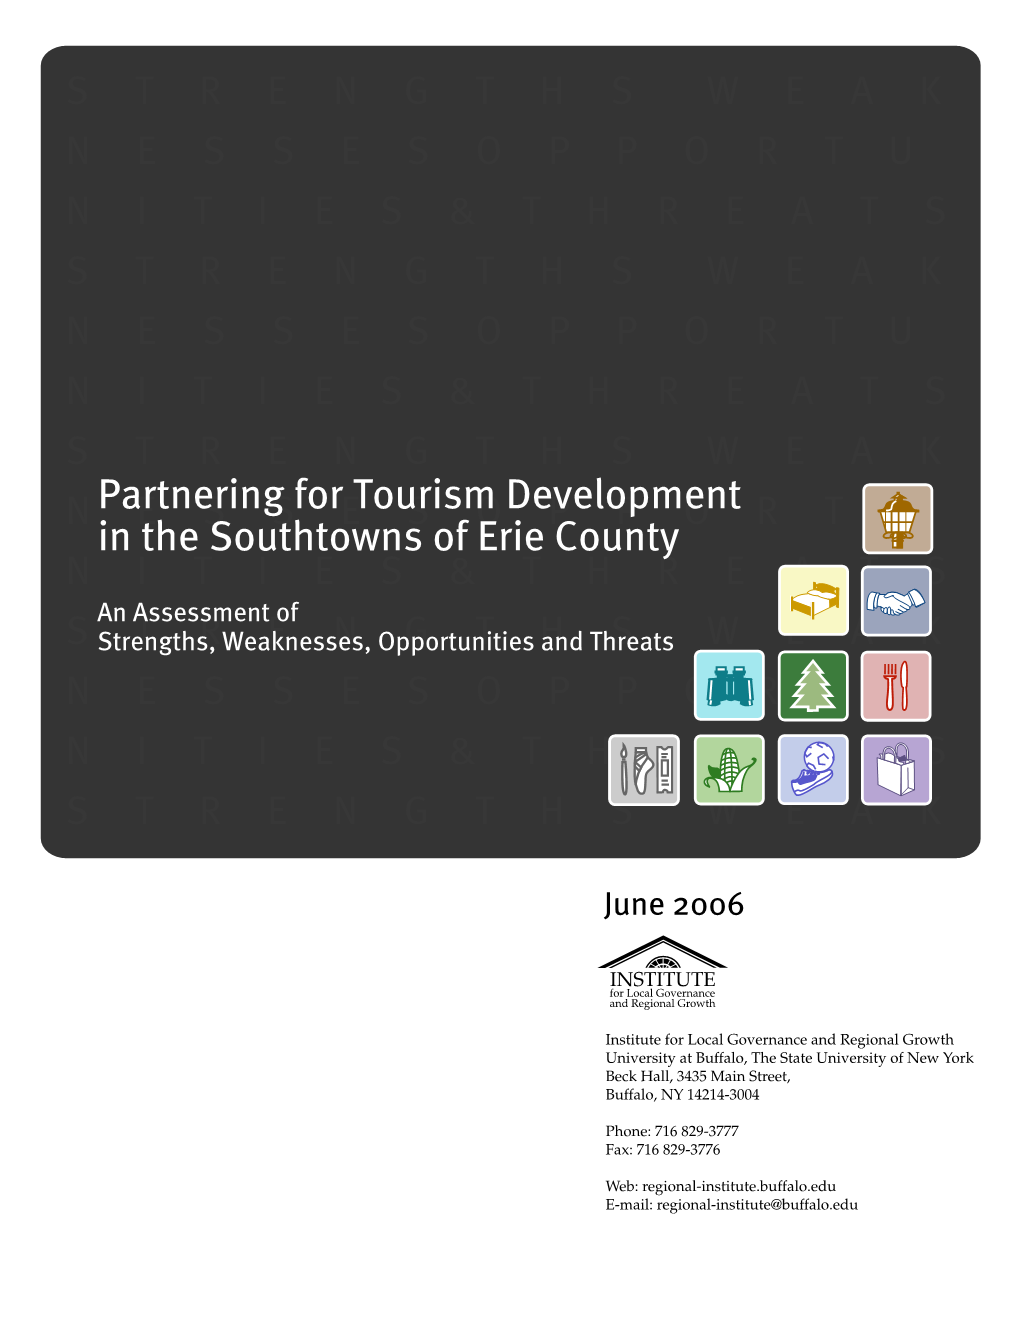 Partnering for Tourism Development in the Southtowns of Erie County